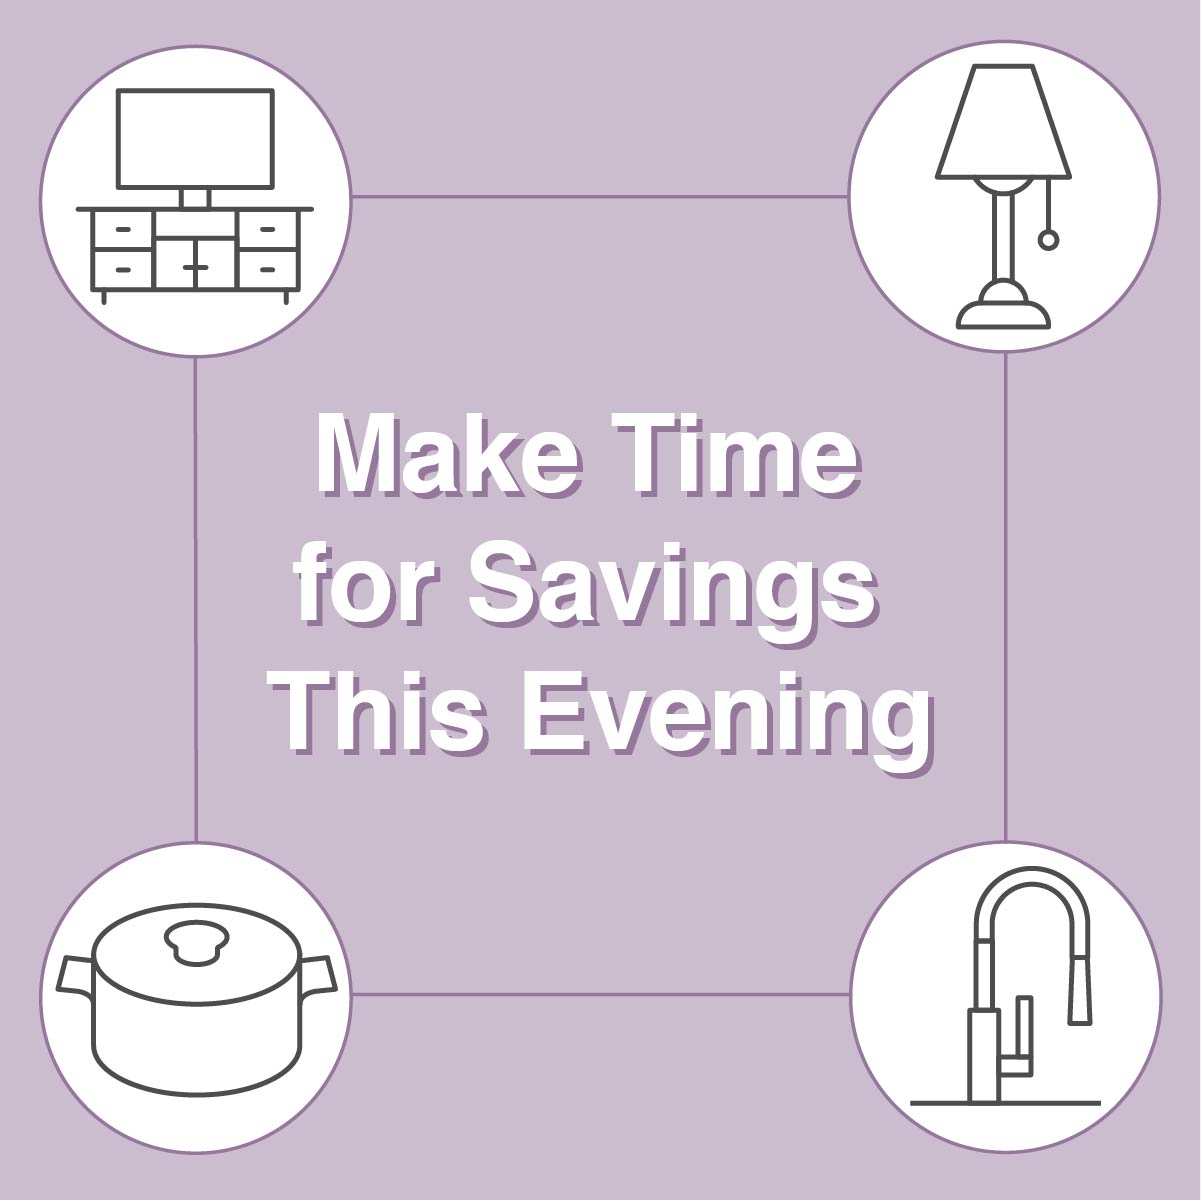 Save energy this evening with these simple tips